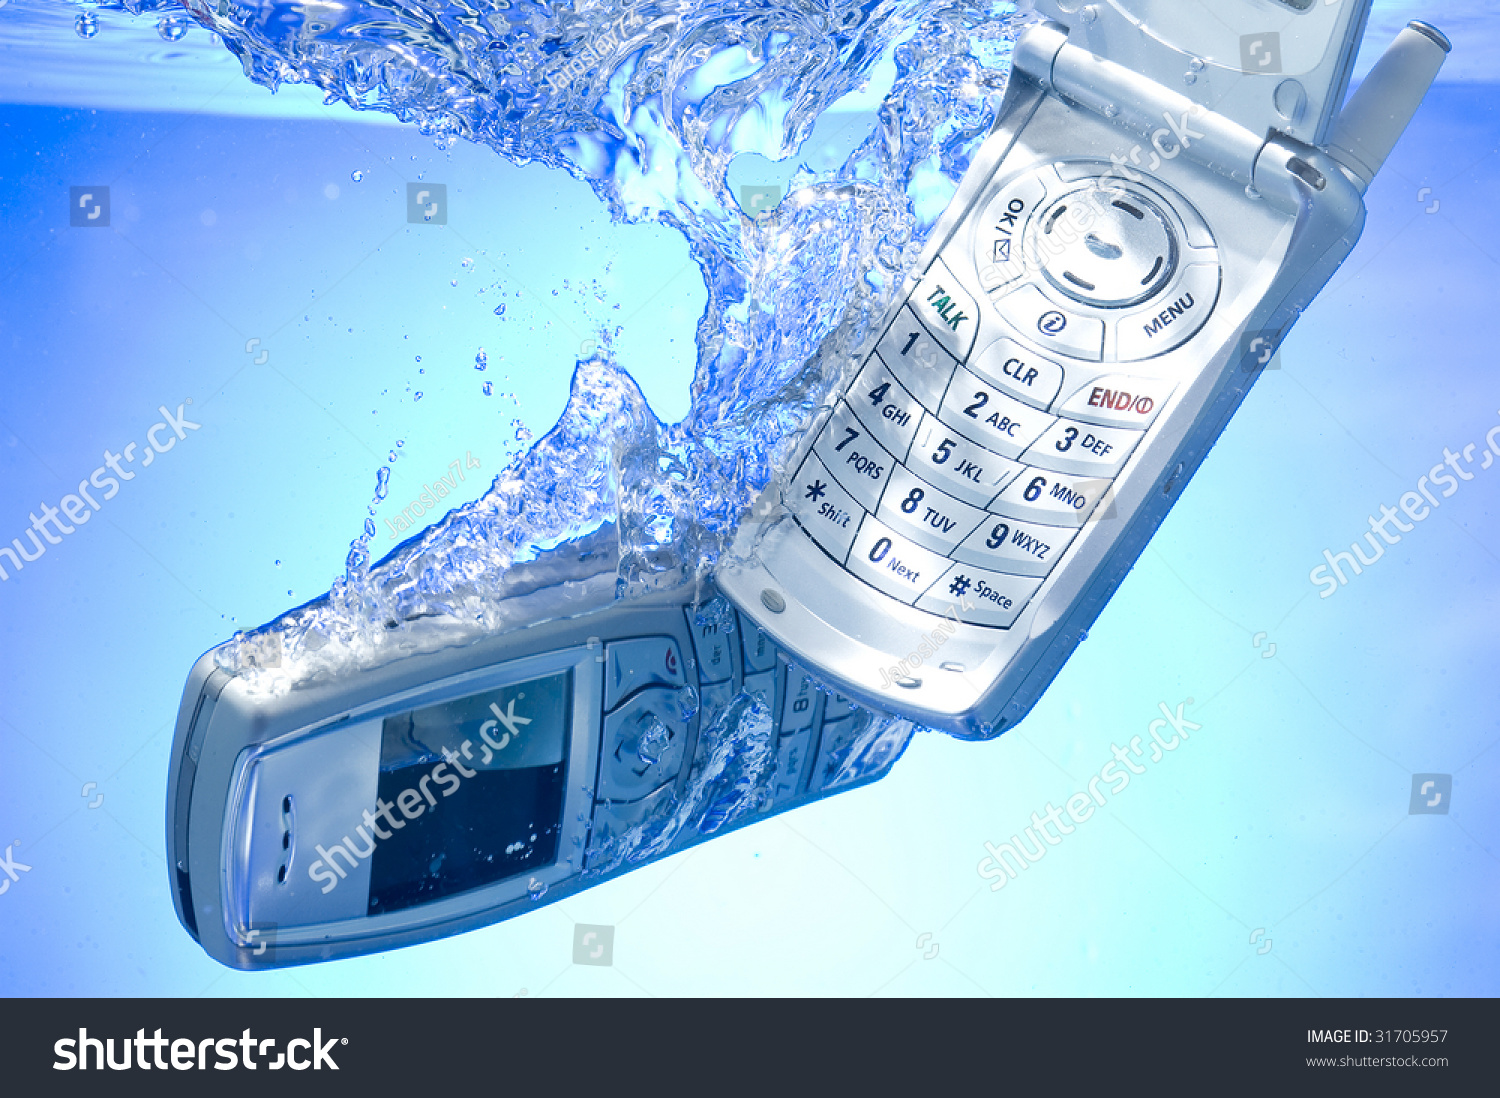 Cellphone In Water 63